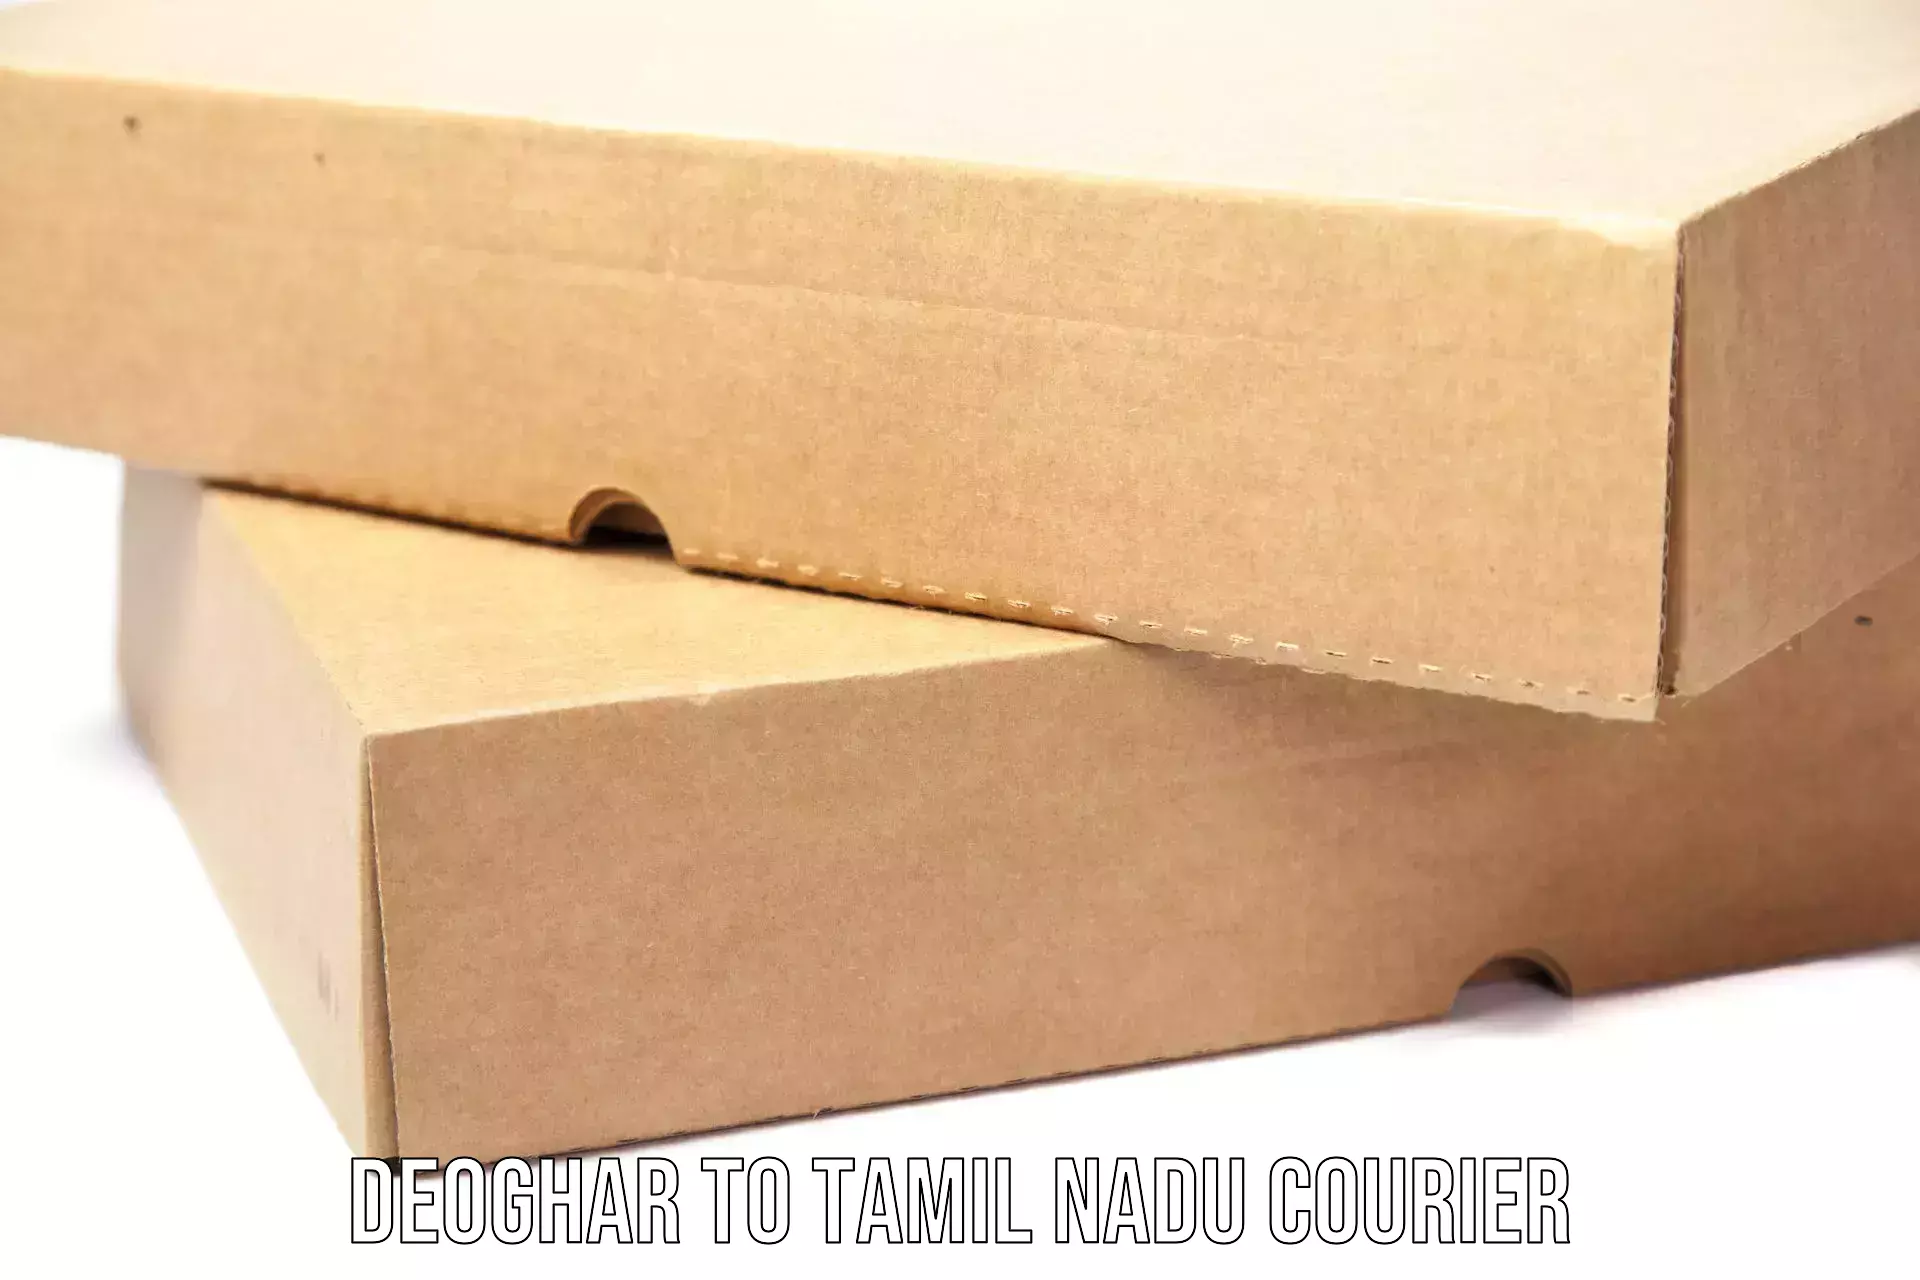 End-to-end delivery Deoghar to Tamil Nadu